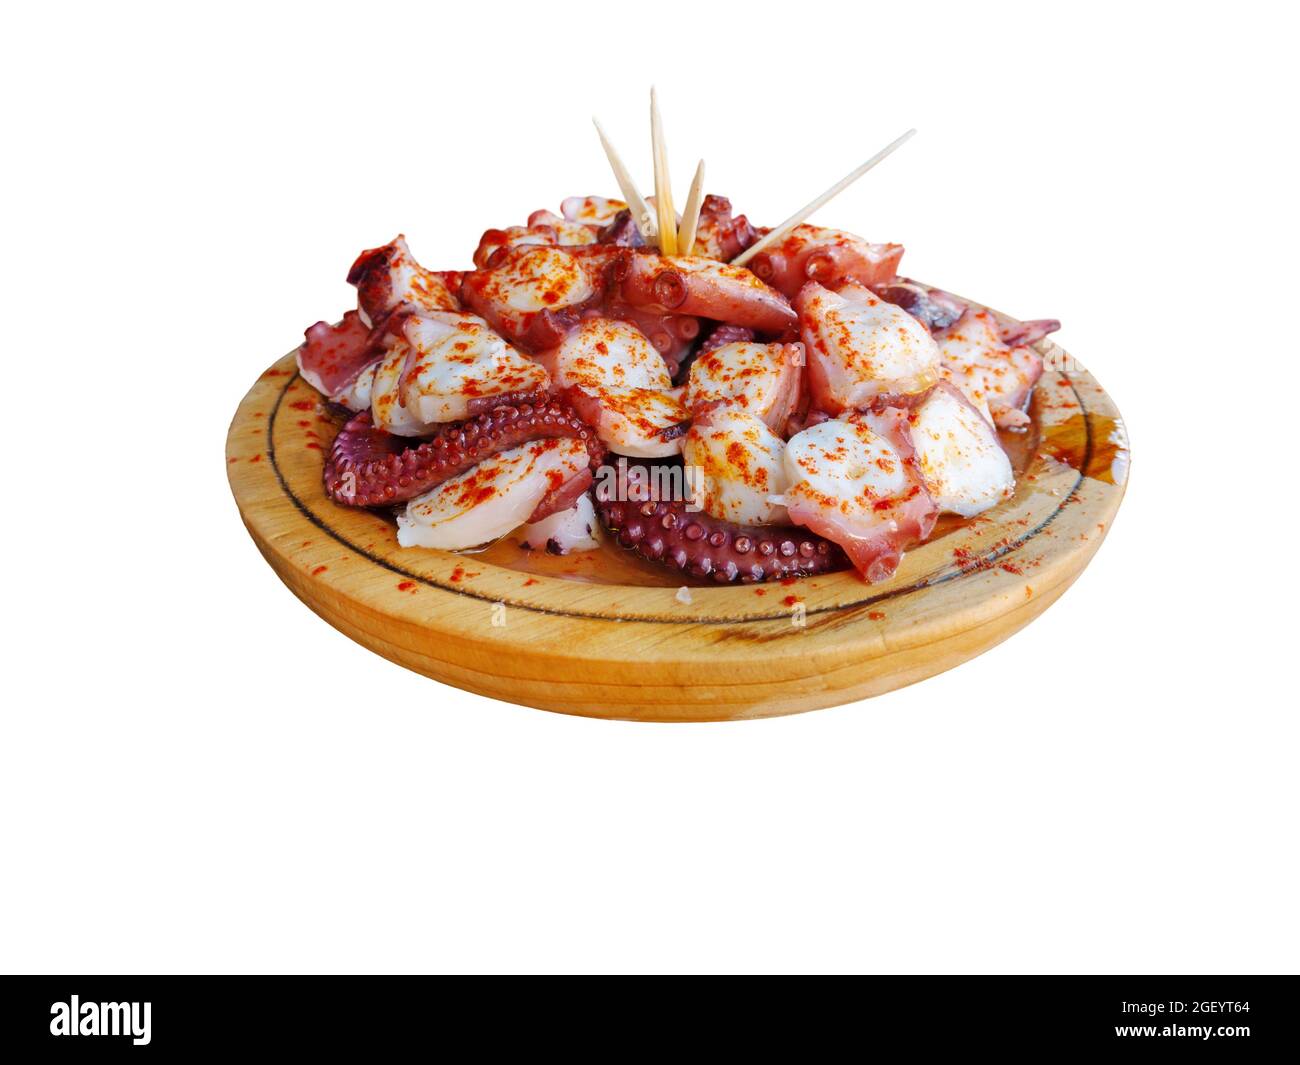 Pulpo a la gallega in Spanish meaning Galician-style octopus  or polbo a feira meaning fair-style octopus in gallego a traditional Galician dish. Isol Stock Photo